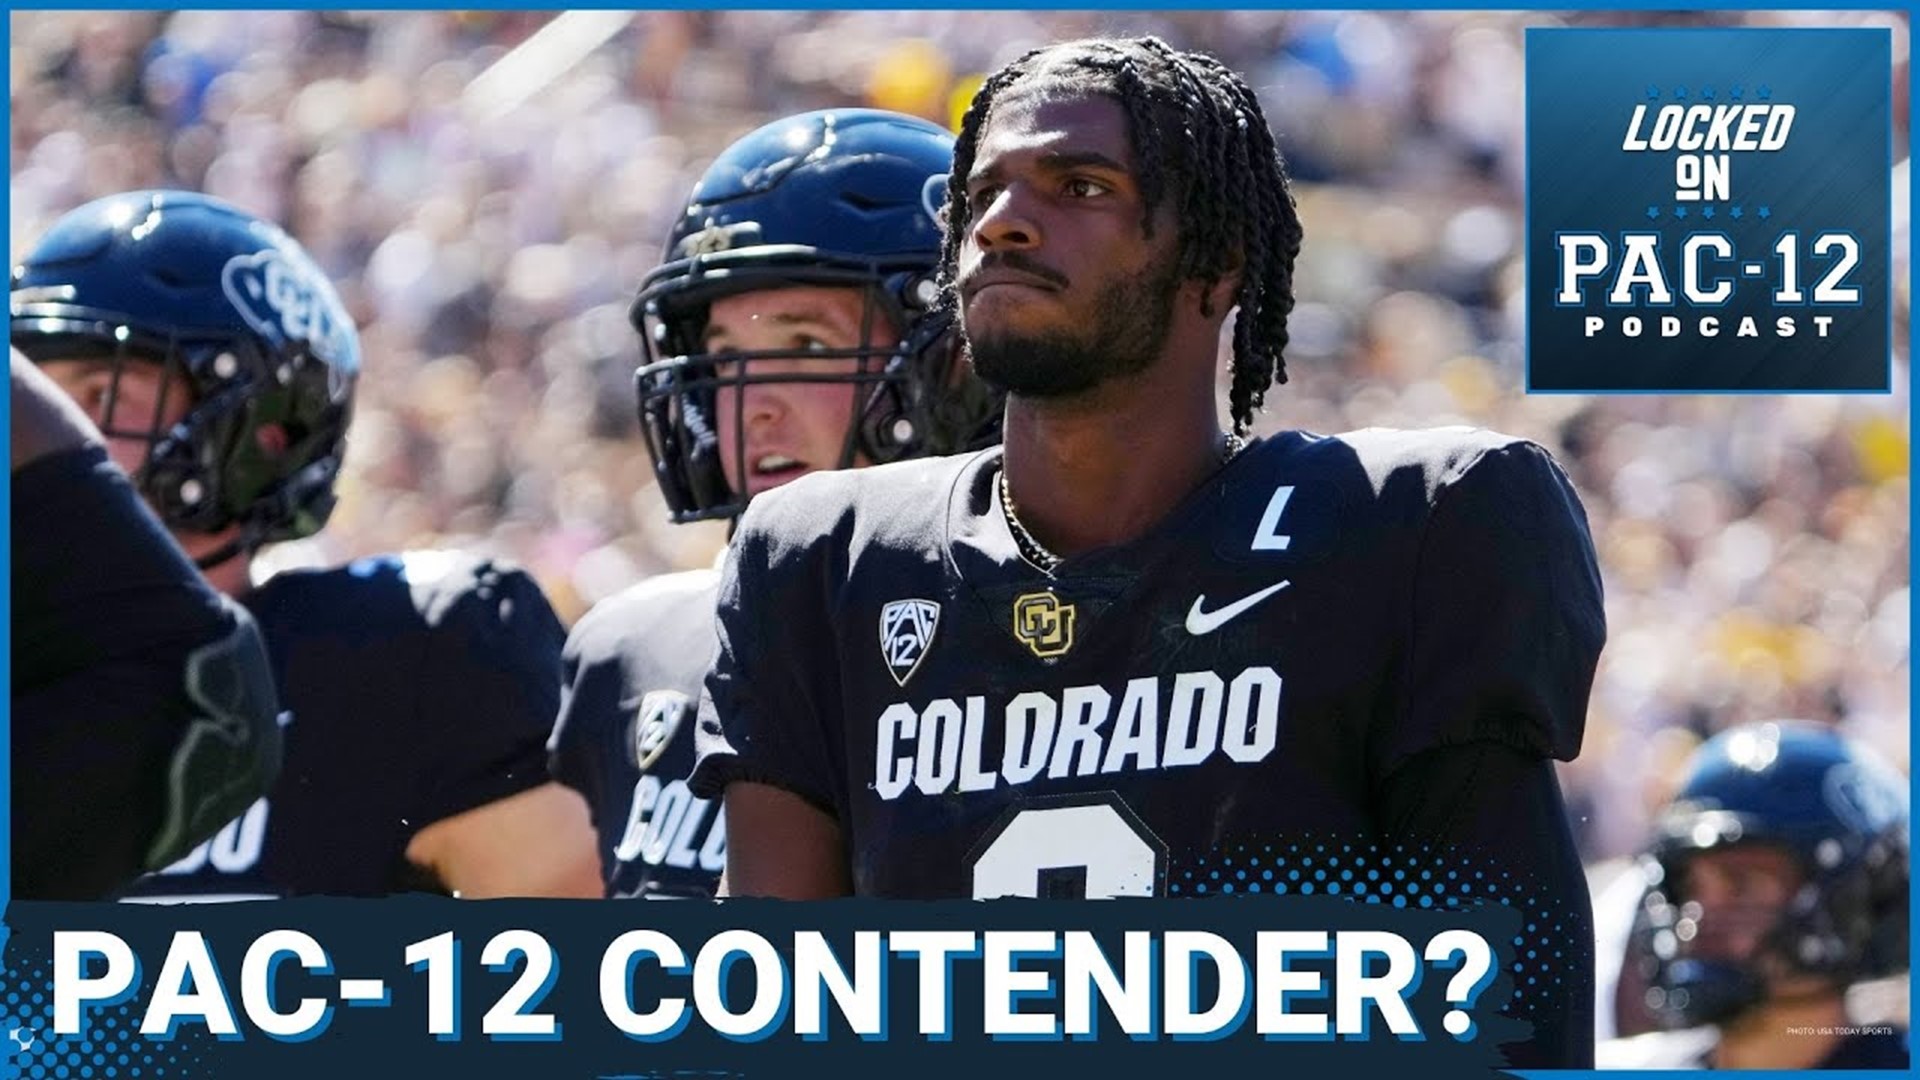 Colorado has been the talk of the college football world through the first 2 weeks with wins over TCU and Nebraska. Ranked inside the top 20 and poised to be 3-0.